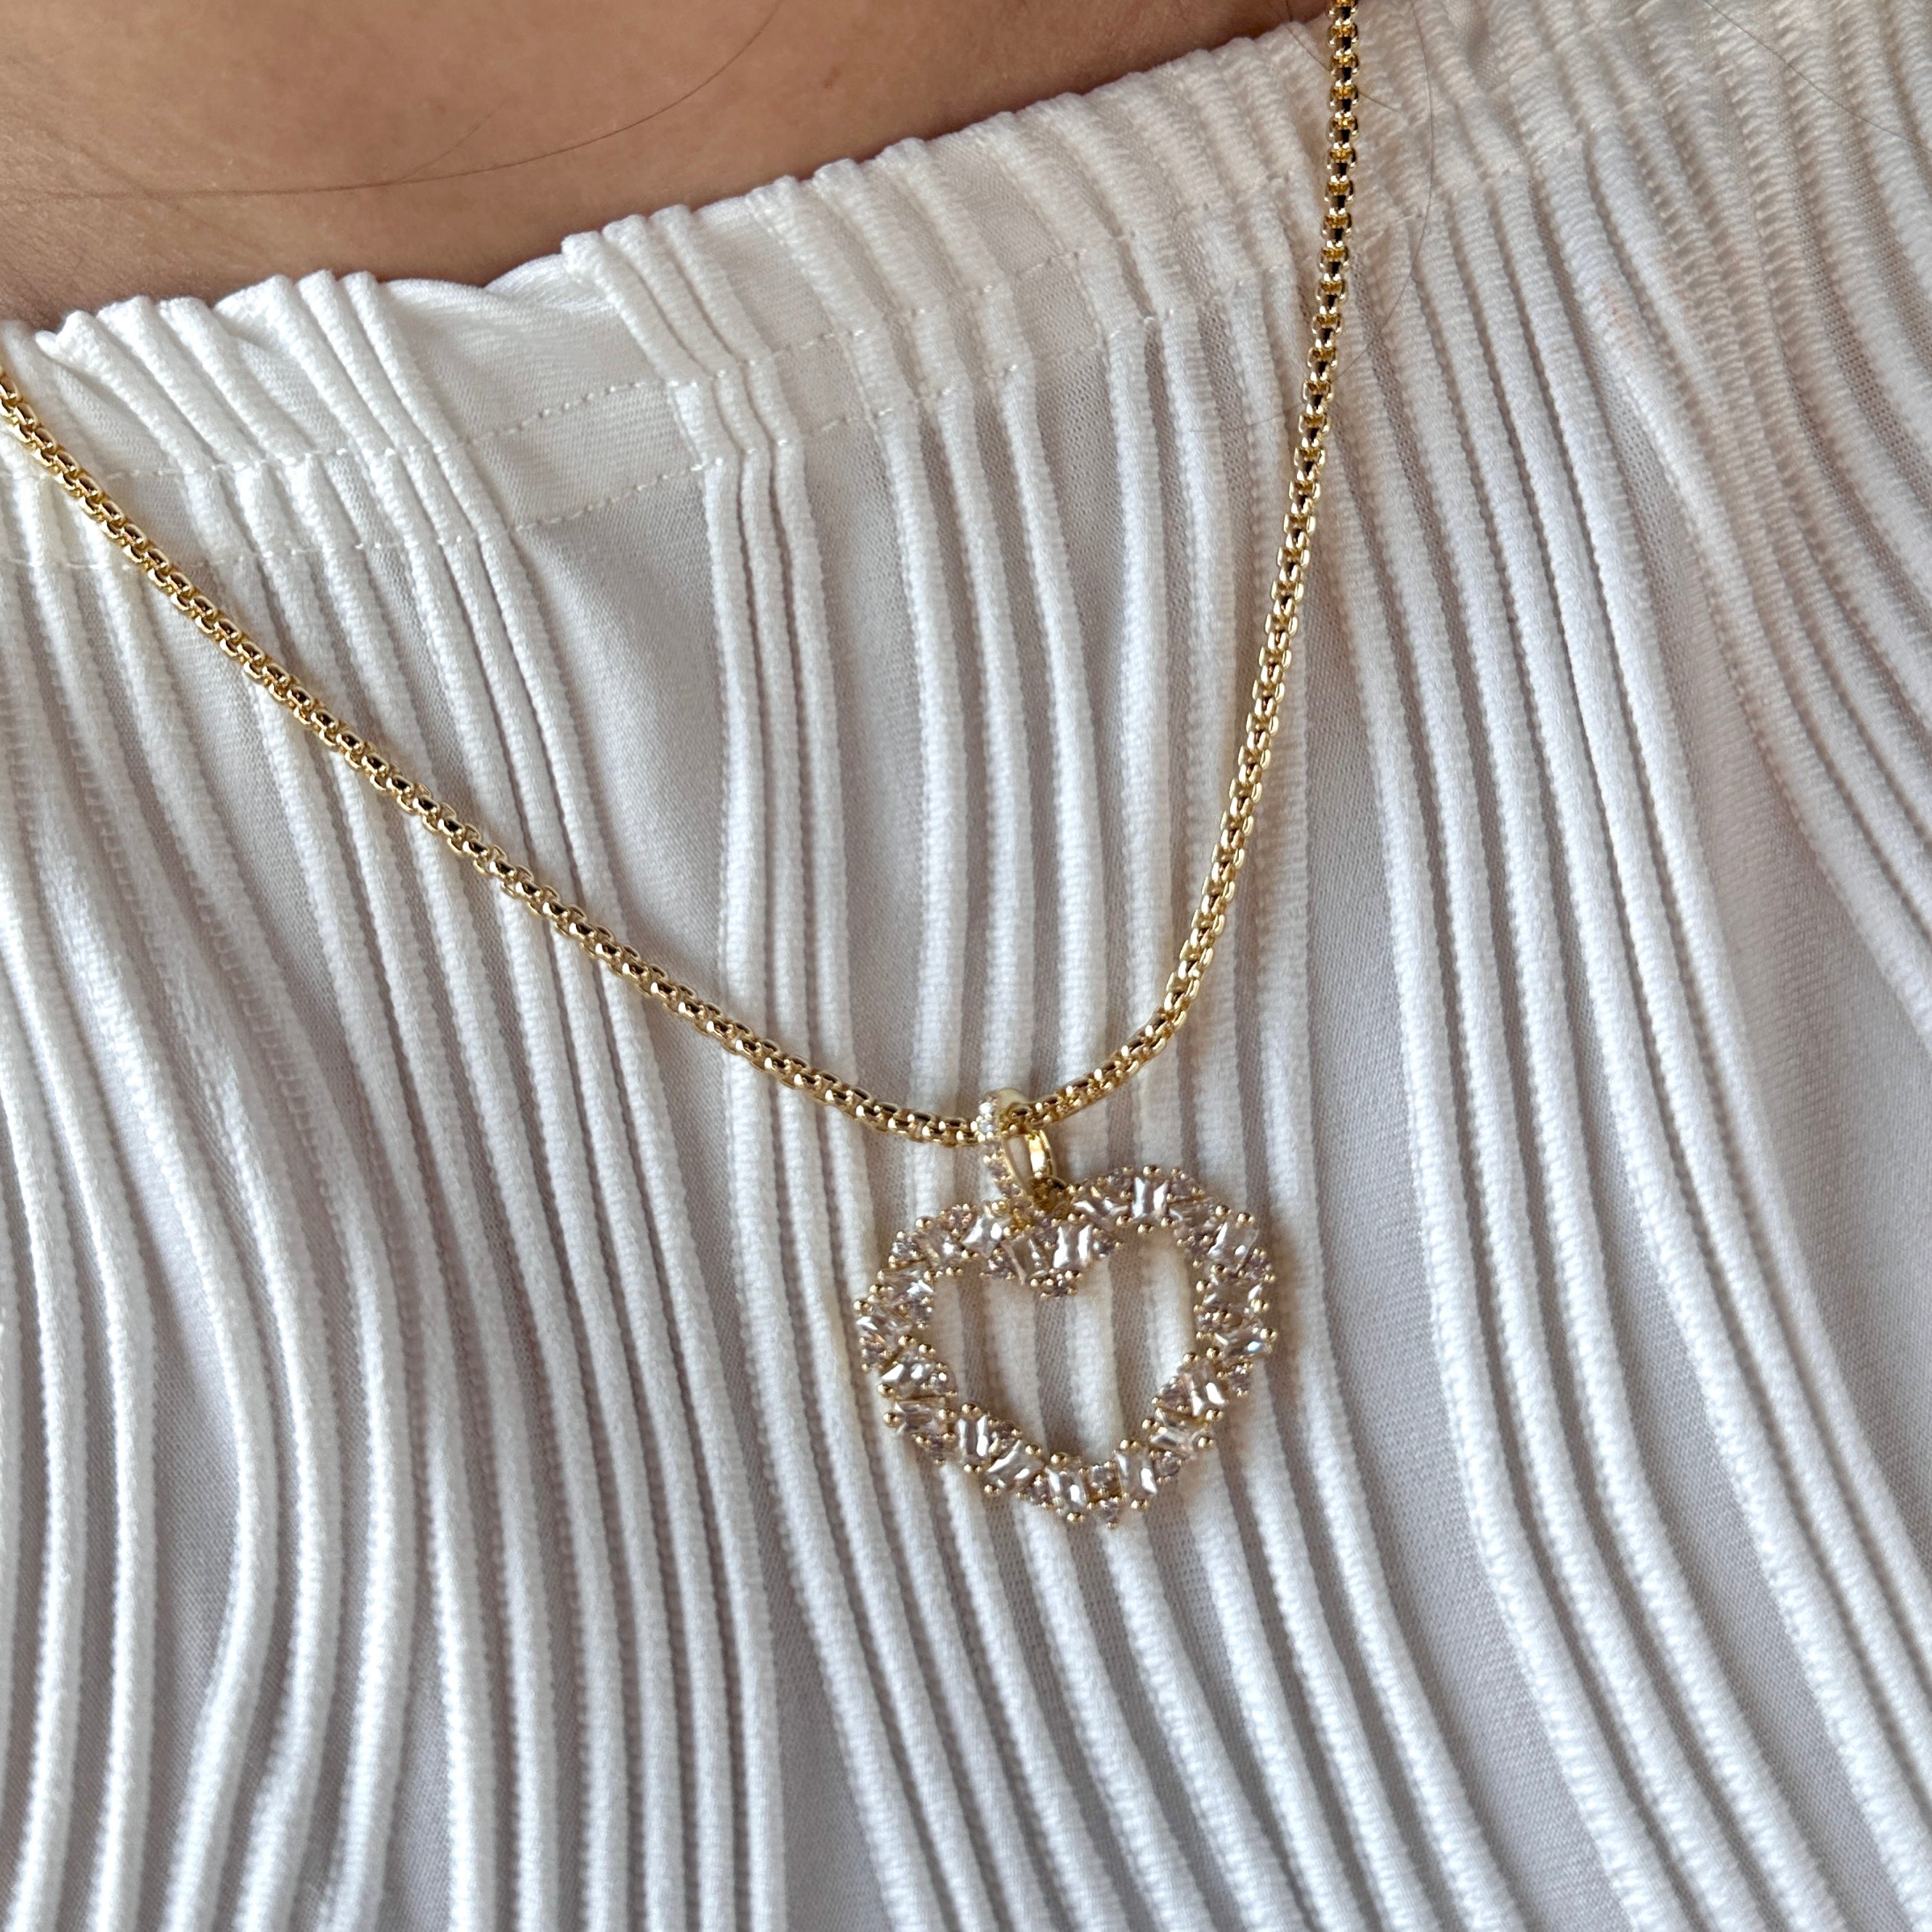 fizzy heart necklace